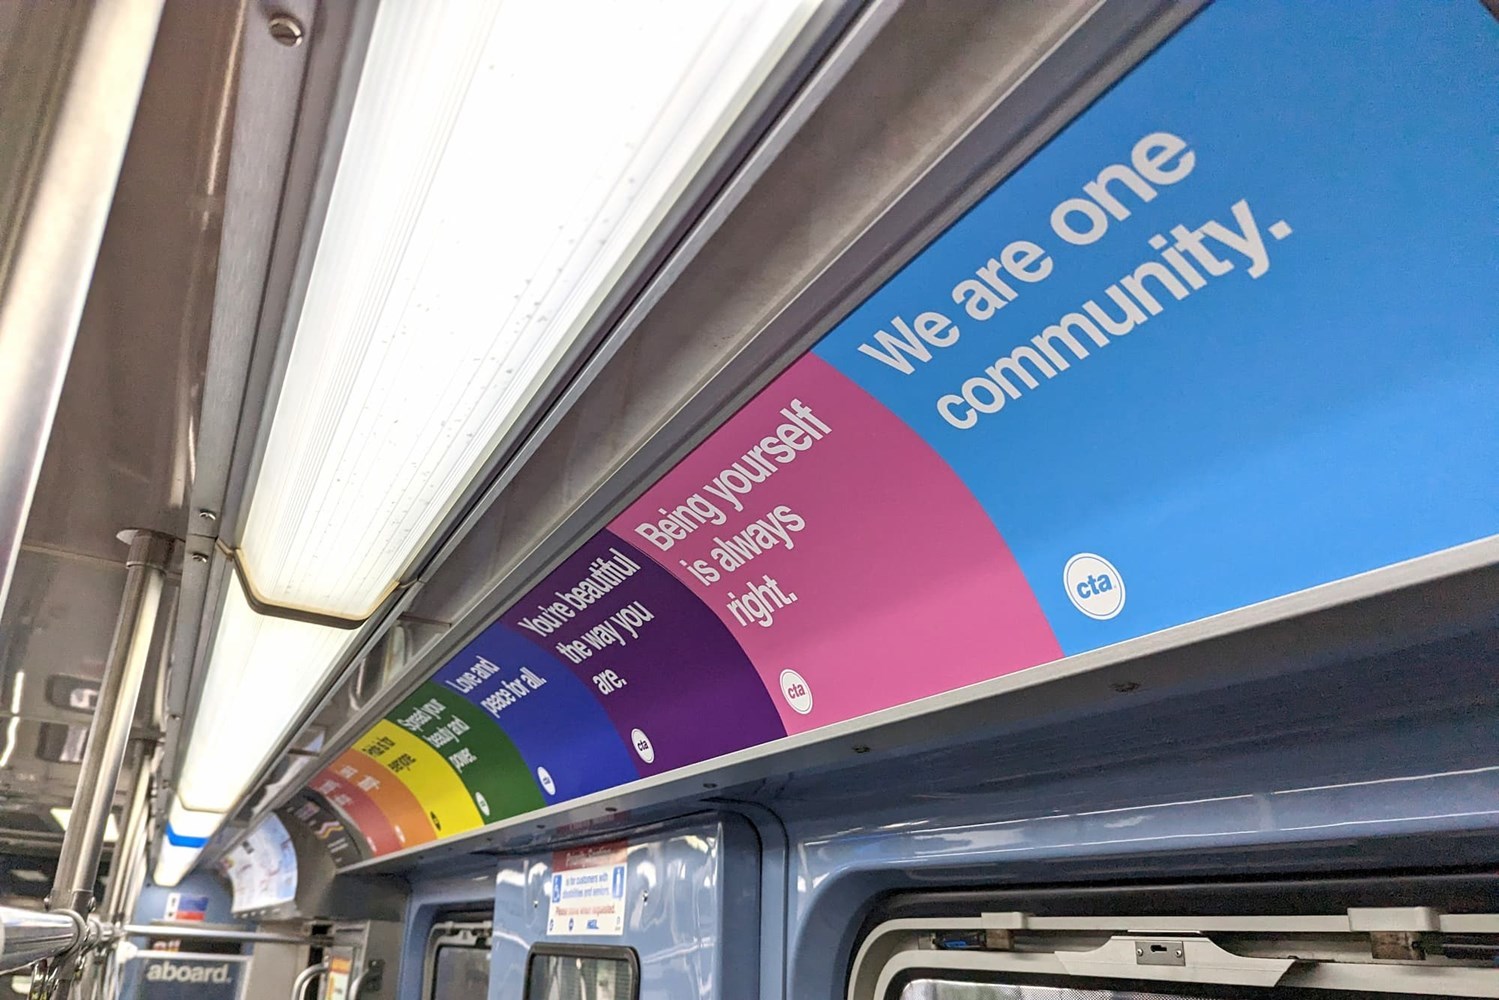 Signs inside the pride train saying "We are one community" and "Being yourself is always right"